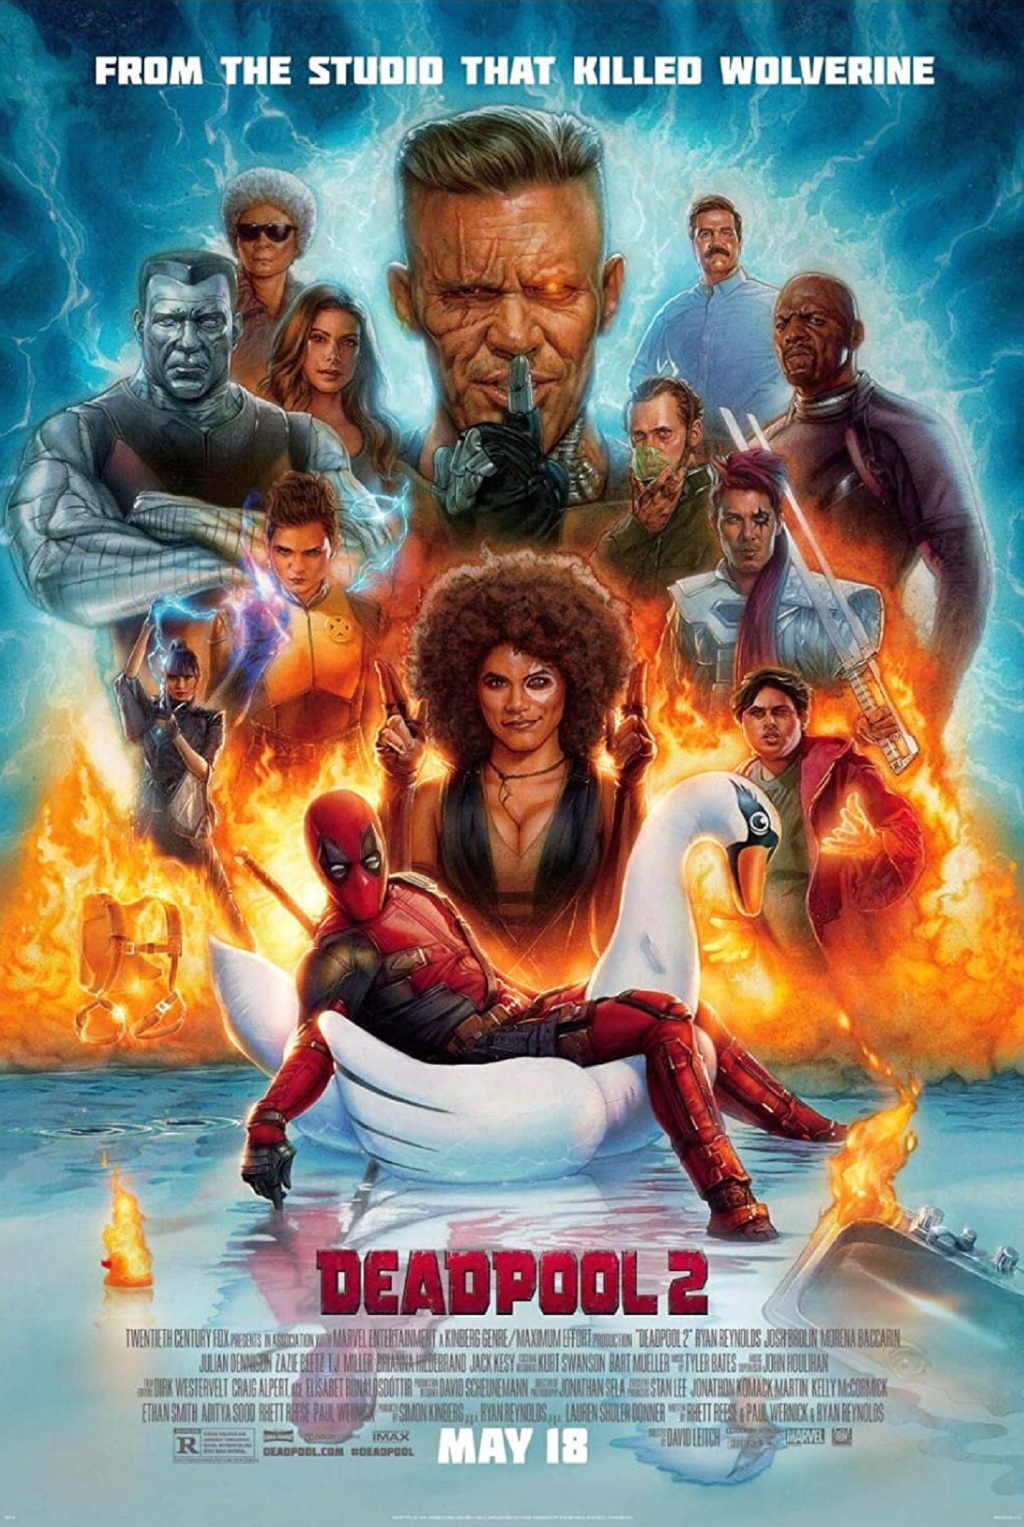 Deadpool 2 (2018) - Phil Catterall joins Tim Worthington for a chat about Wade Wilson leading the newly formed X-Force straight into some overhead power lines in It's Good, Except It Sucks - a movie by movie – and television series by television series – hurtle through the Marvel Cinematic Universe.